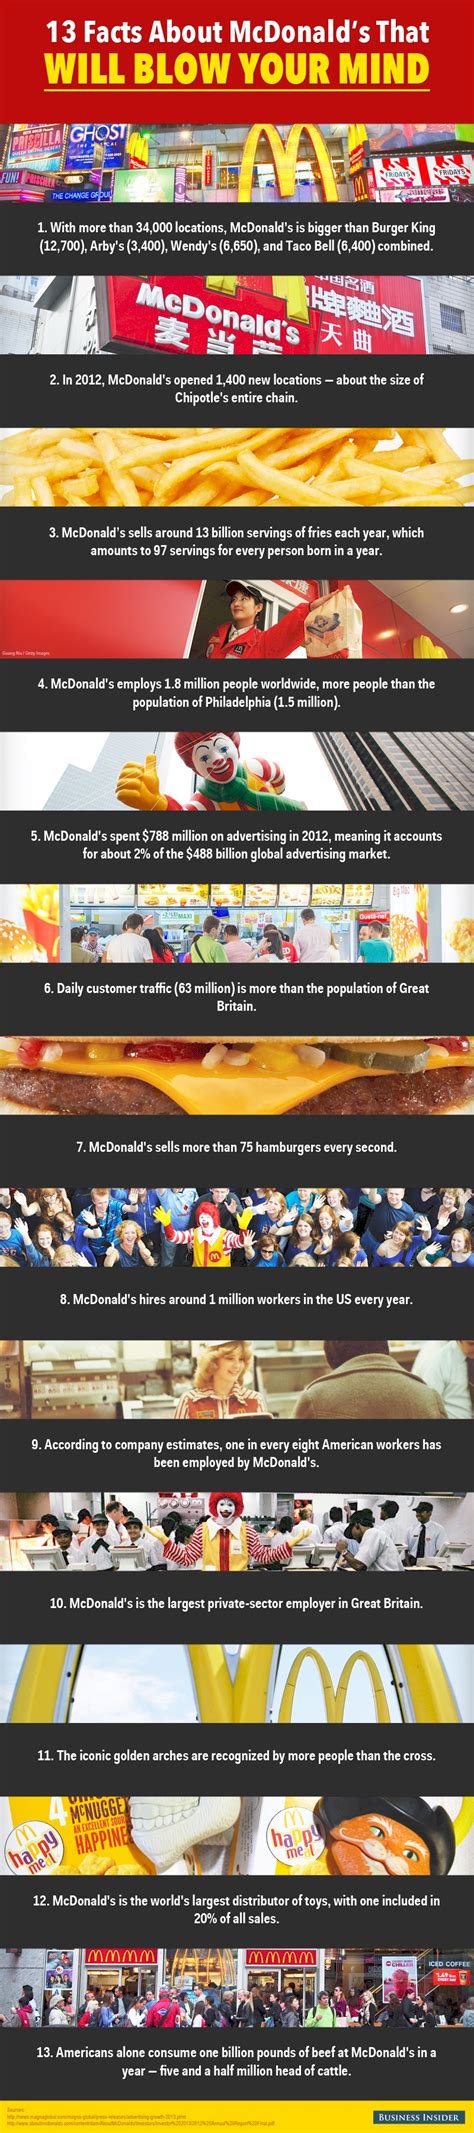 13 Interesting Facts About Mcdonalds